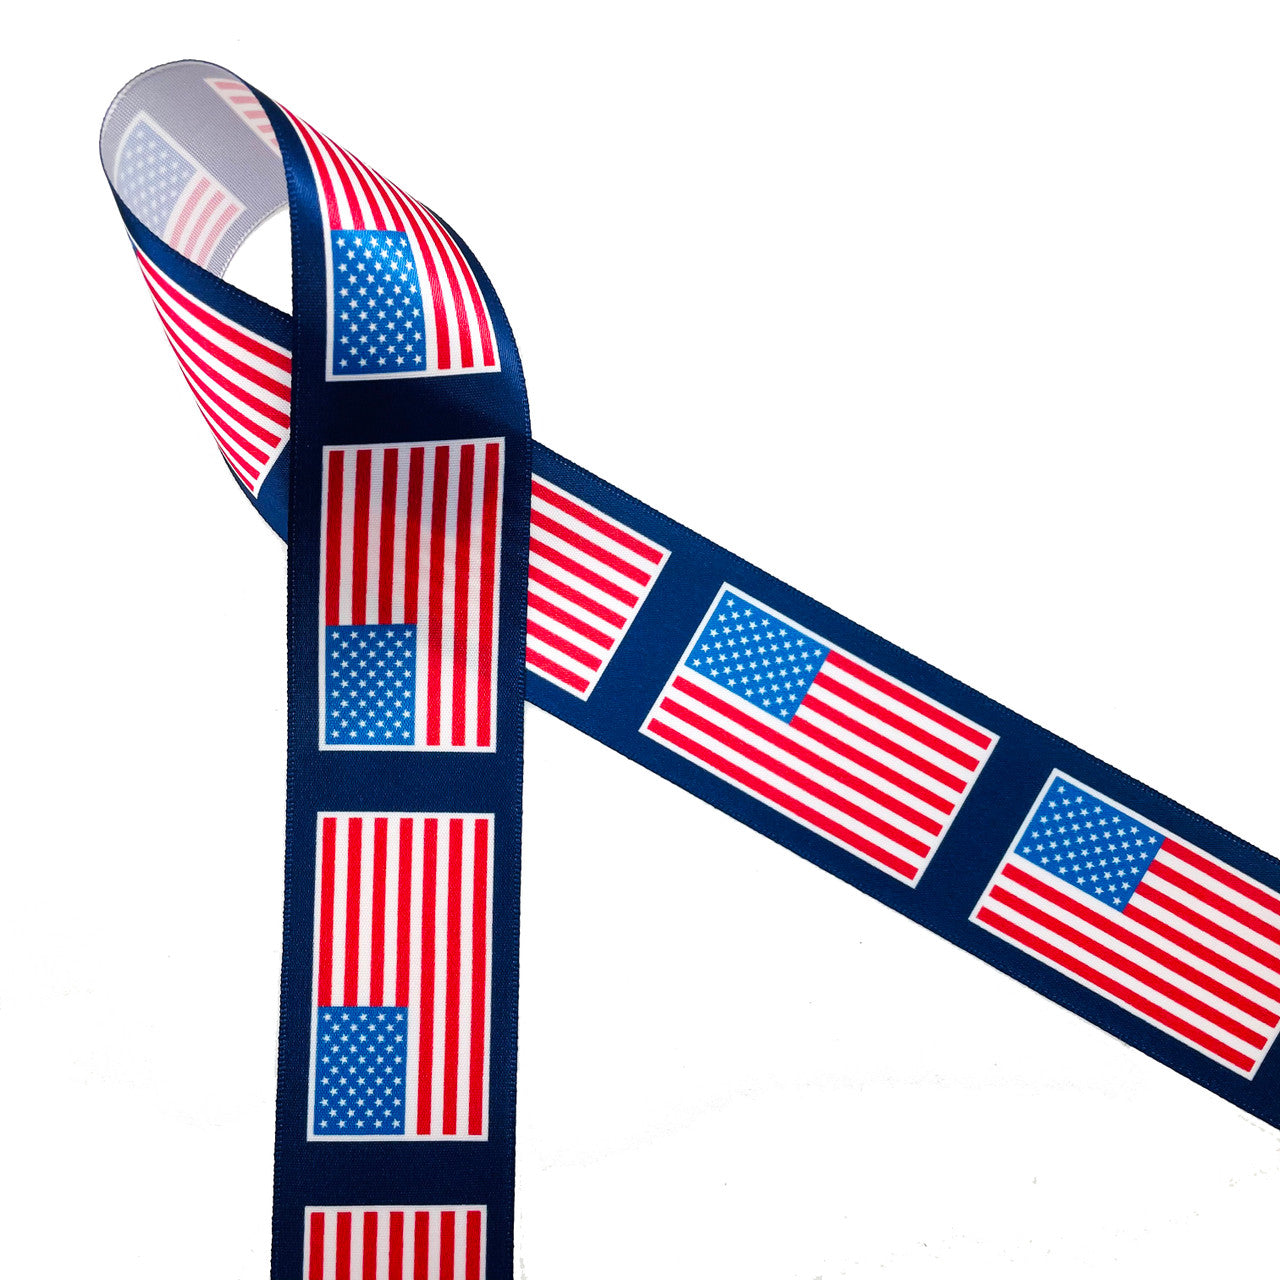 American Flags line up on a navy blue background printed on 1.5" white satin ribbon for the perfect patriotic ribbon! This is an ideal ribbon for 4th of July, Memorial Day and Veterans Day. Use this ribbon for hair bows, wreaths, party decor and gift wrap for the biggest Summer holiday! All our ribbon is designed and printed in the USA